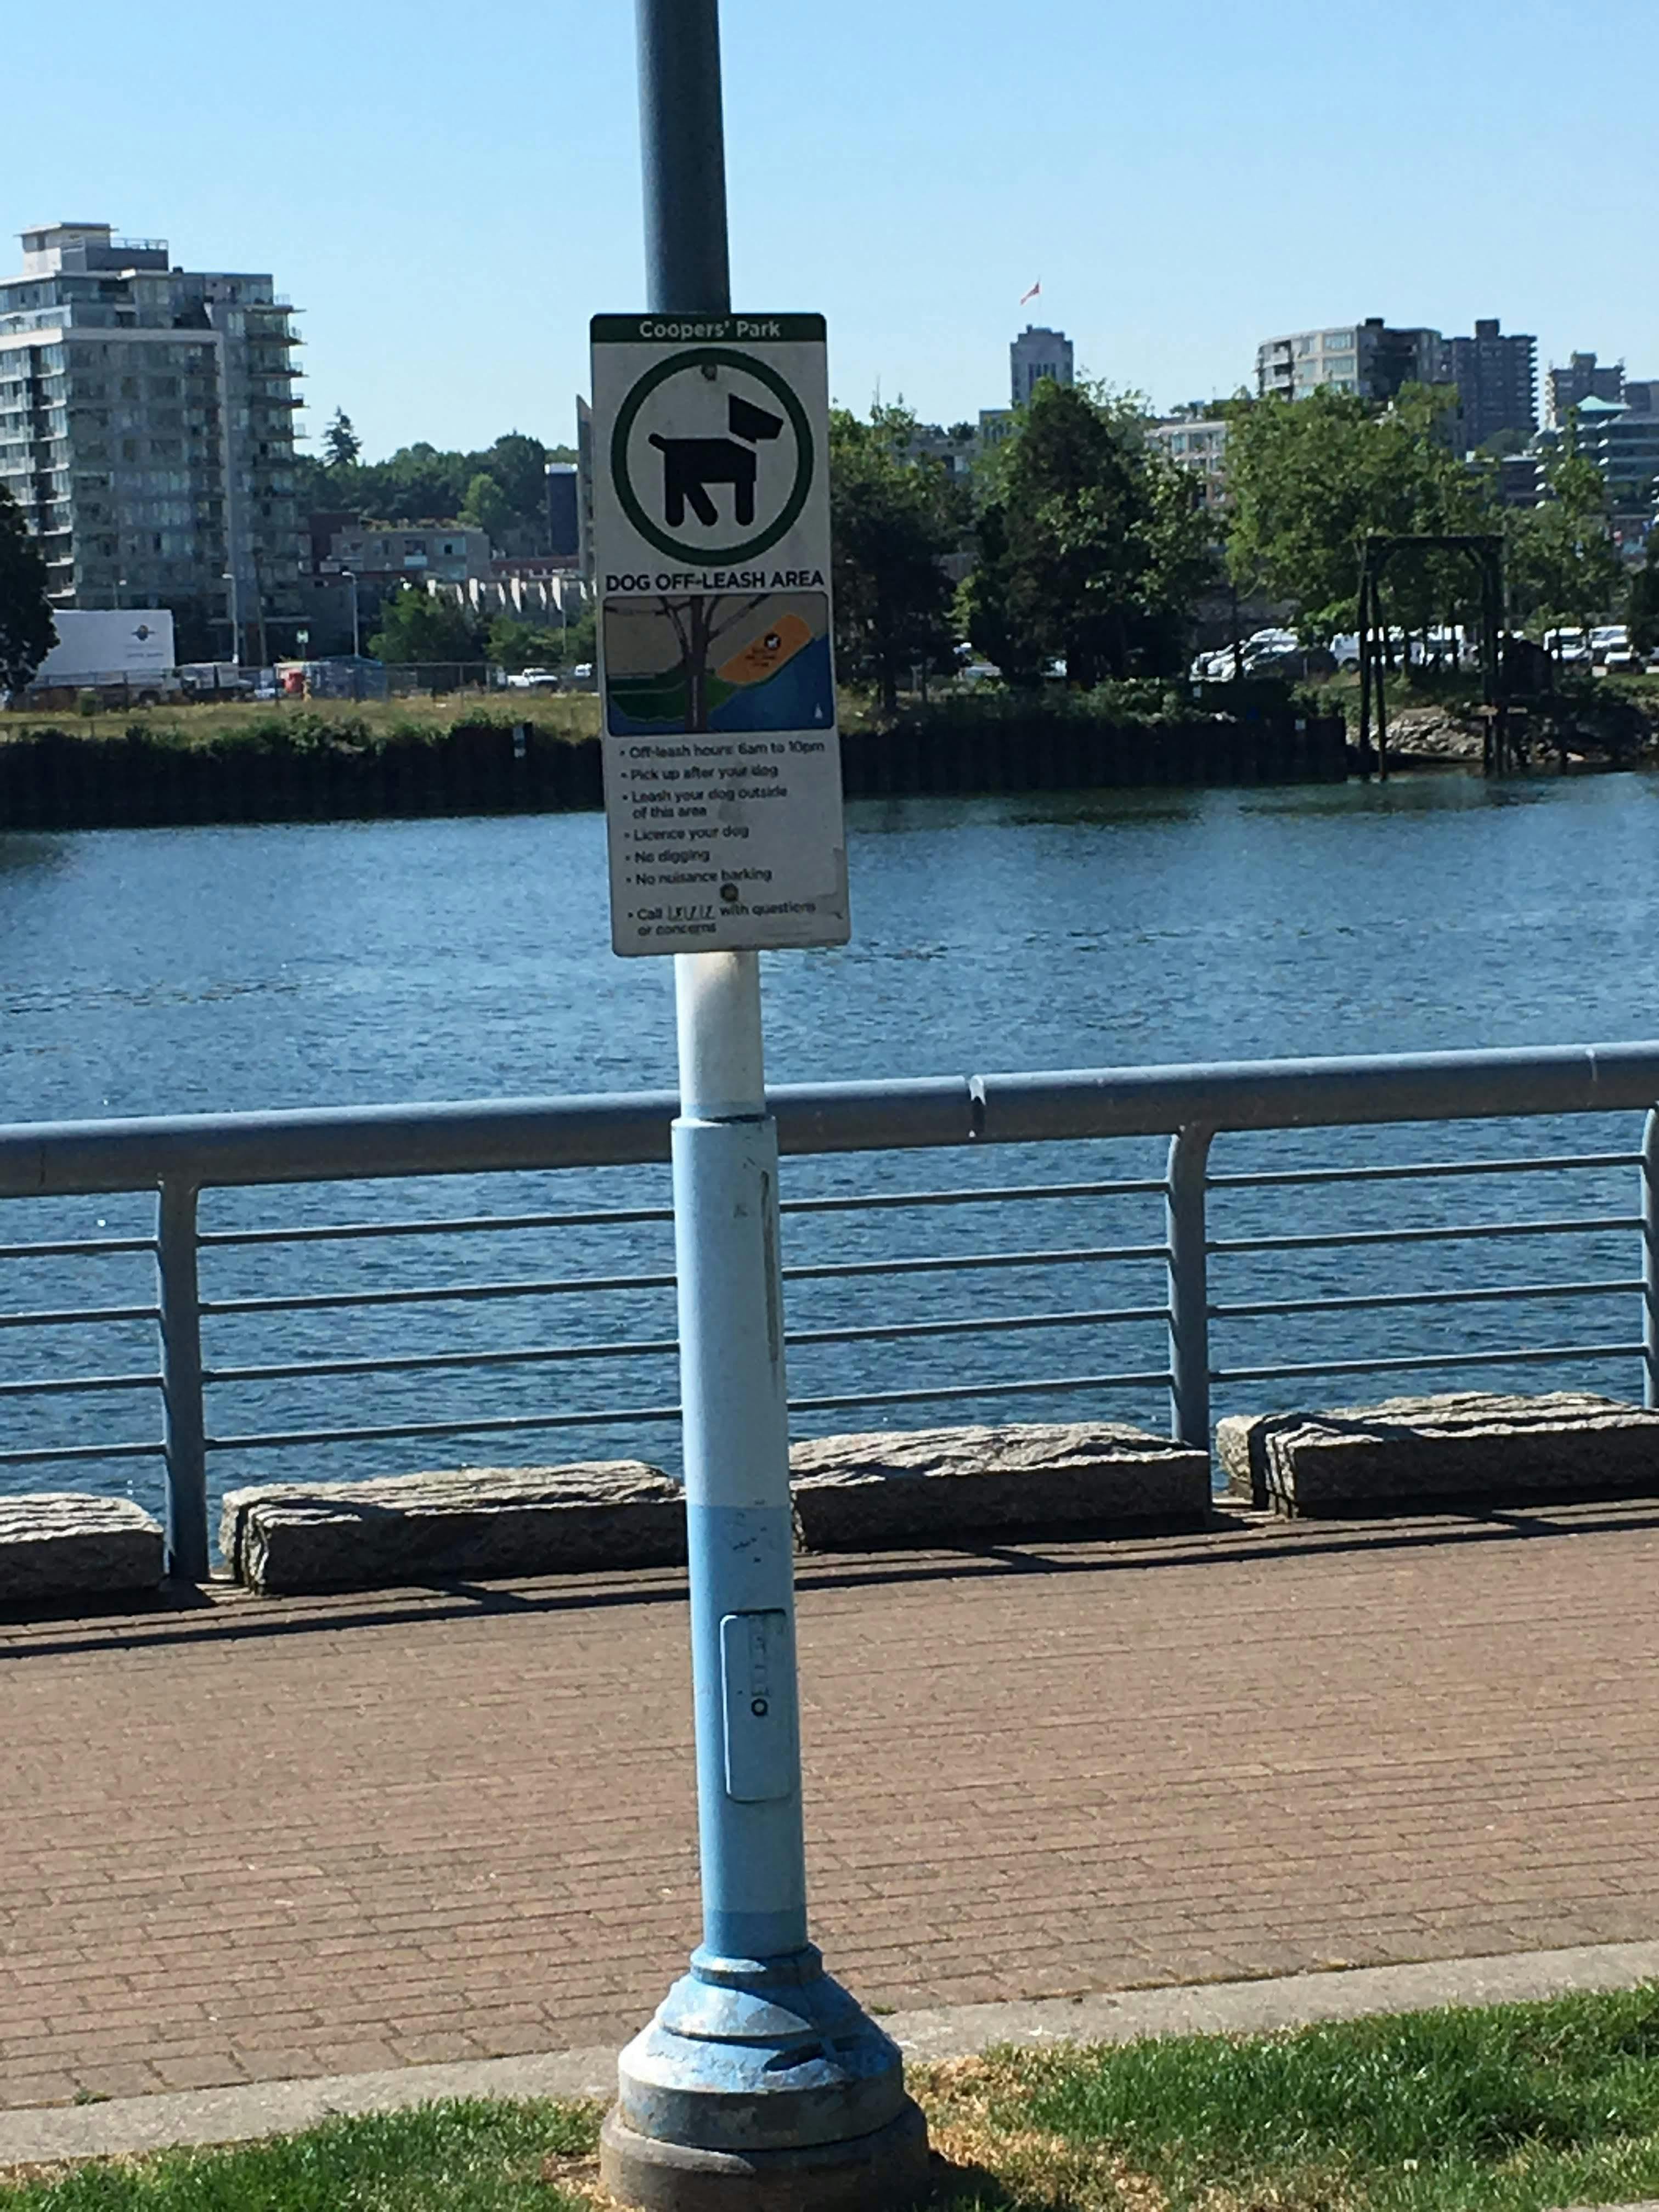 Dog off-leash sign with False Creek in background